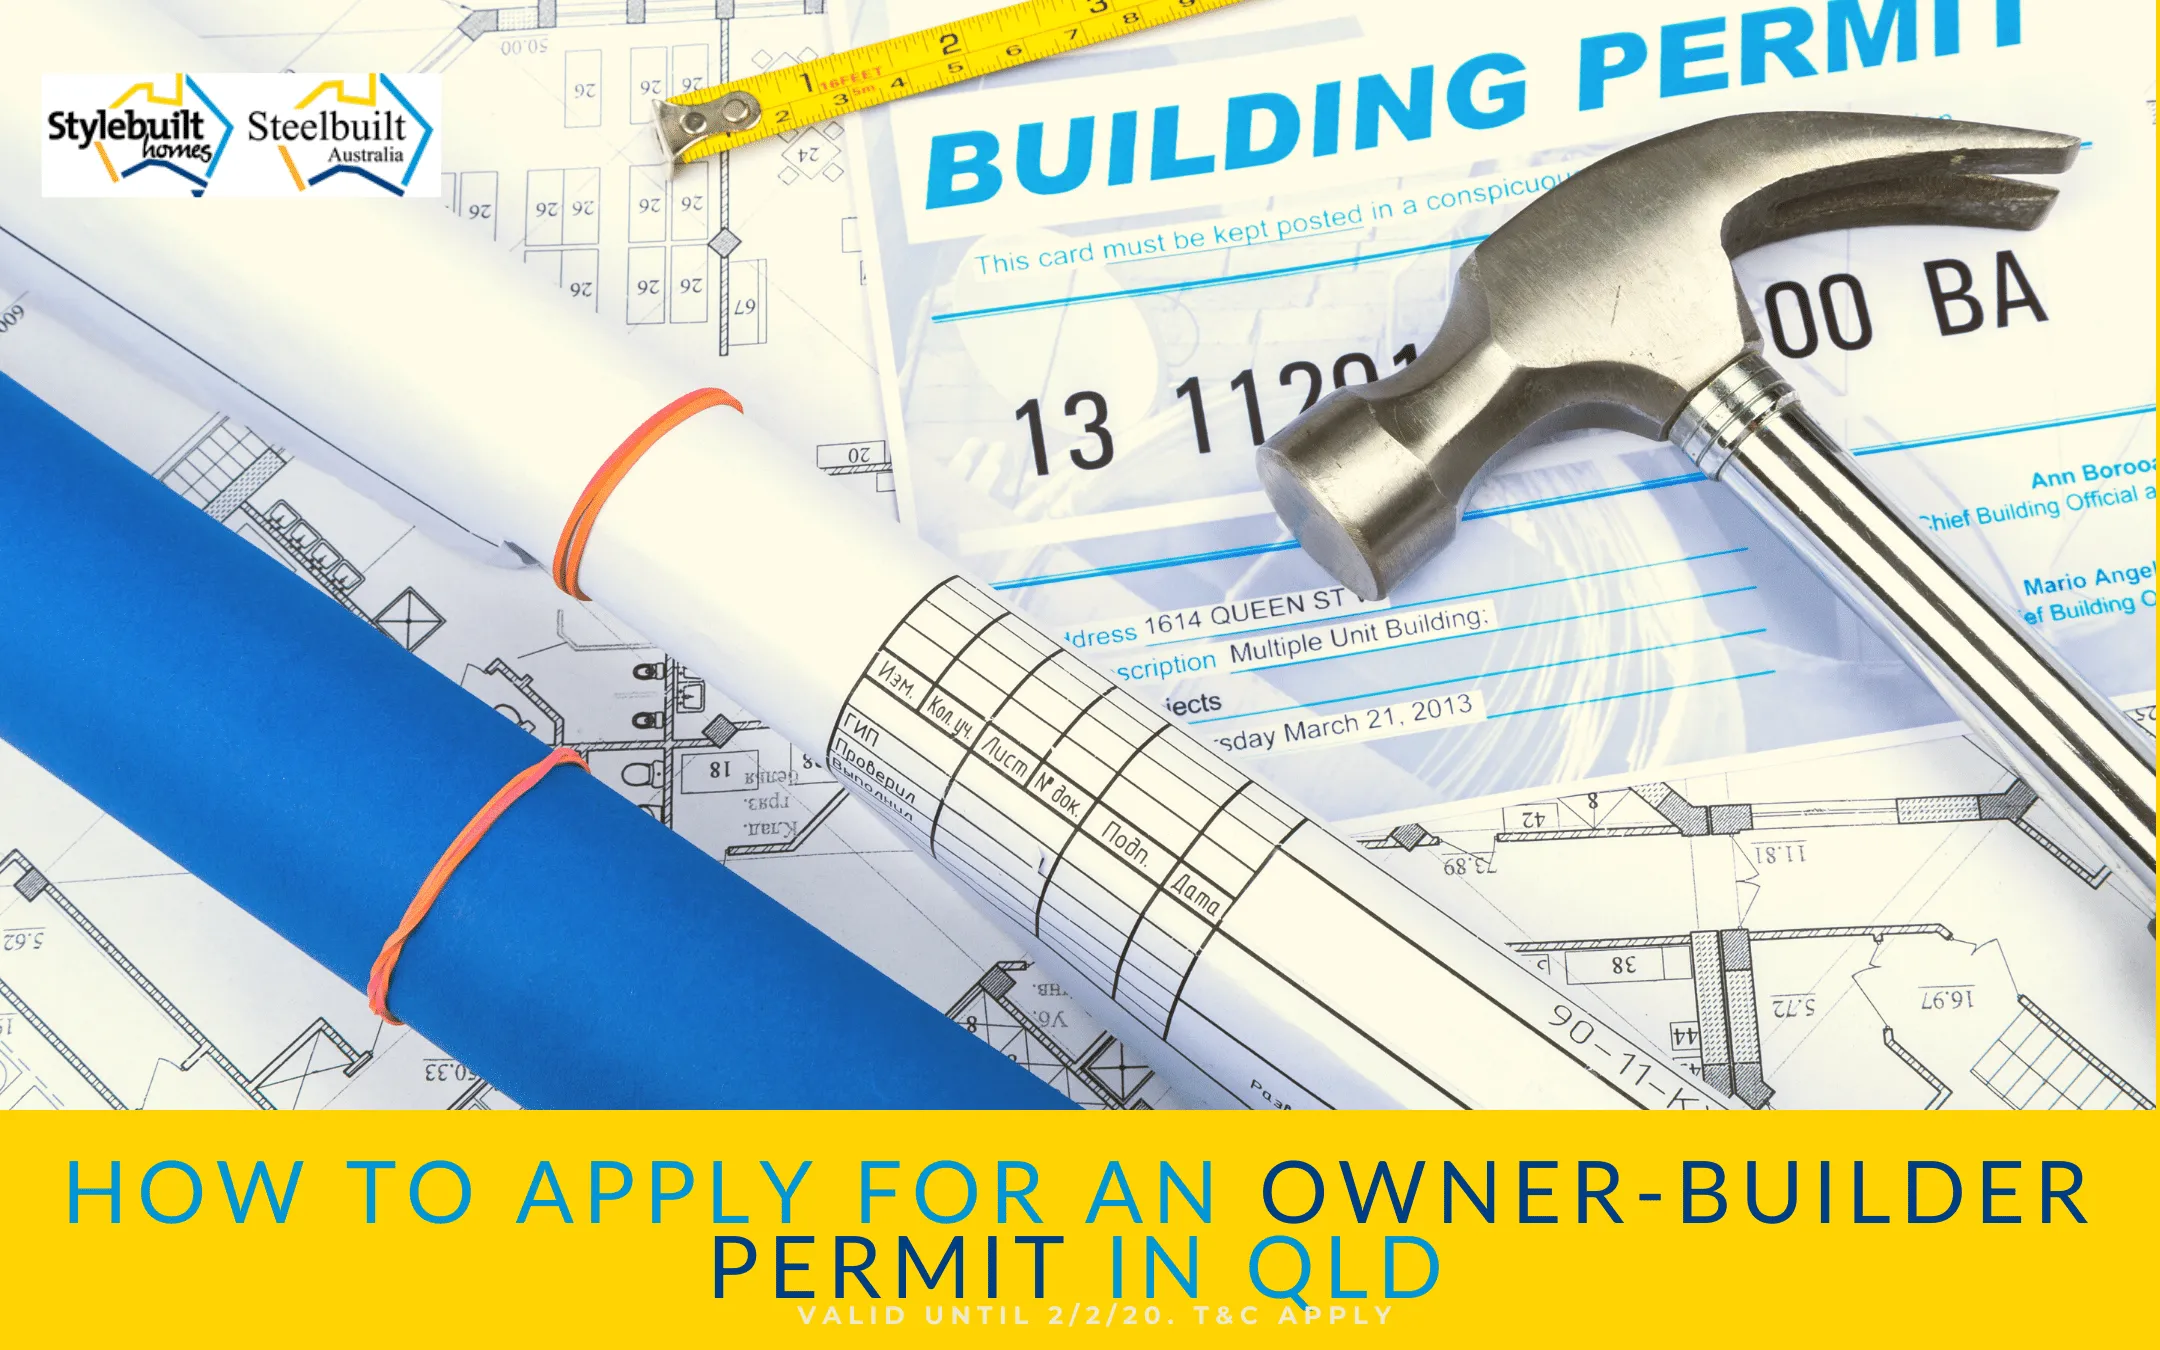 How to apply for an owner-builder’s permit in Queensland